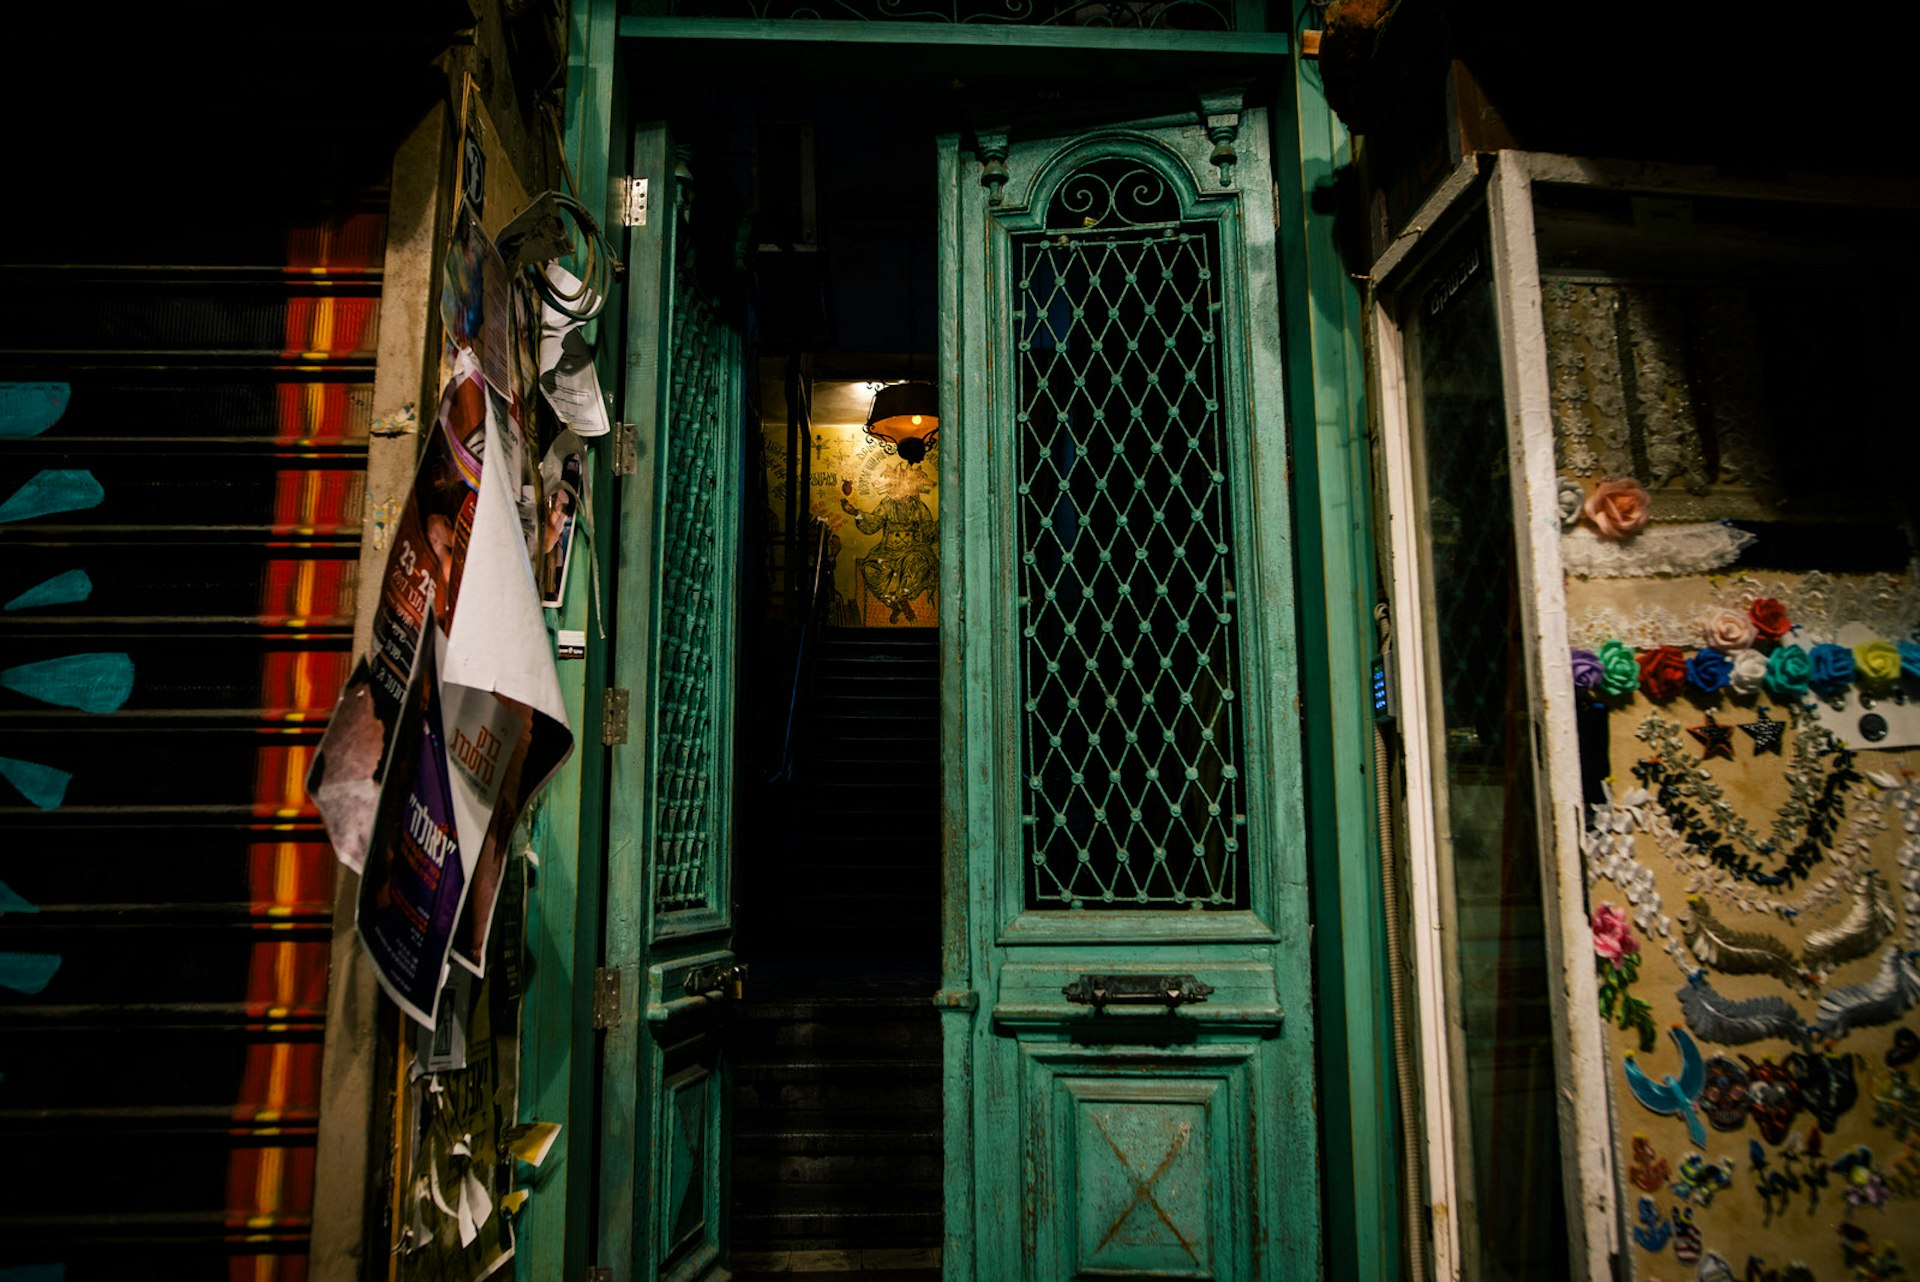 Entrance to the Prince bar in Tel Aviv, Israel © The Prince